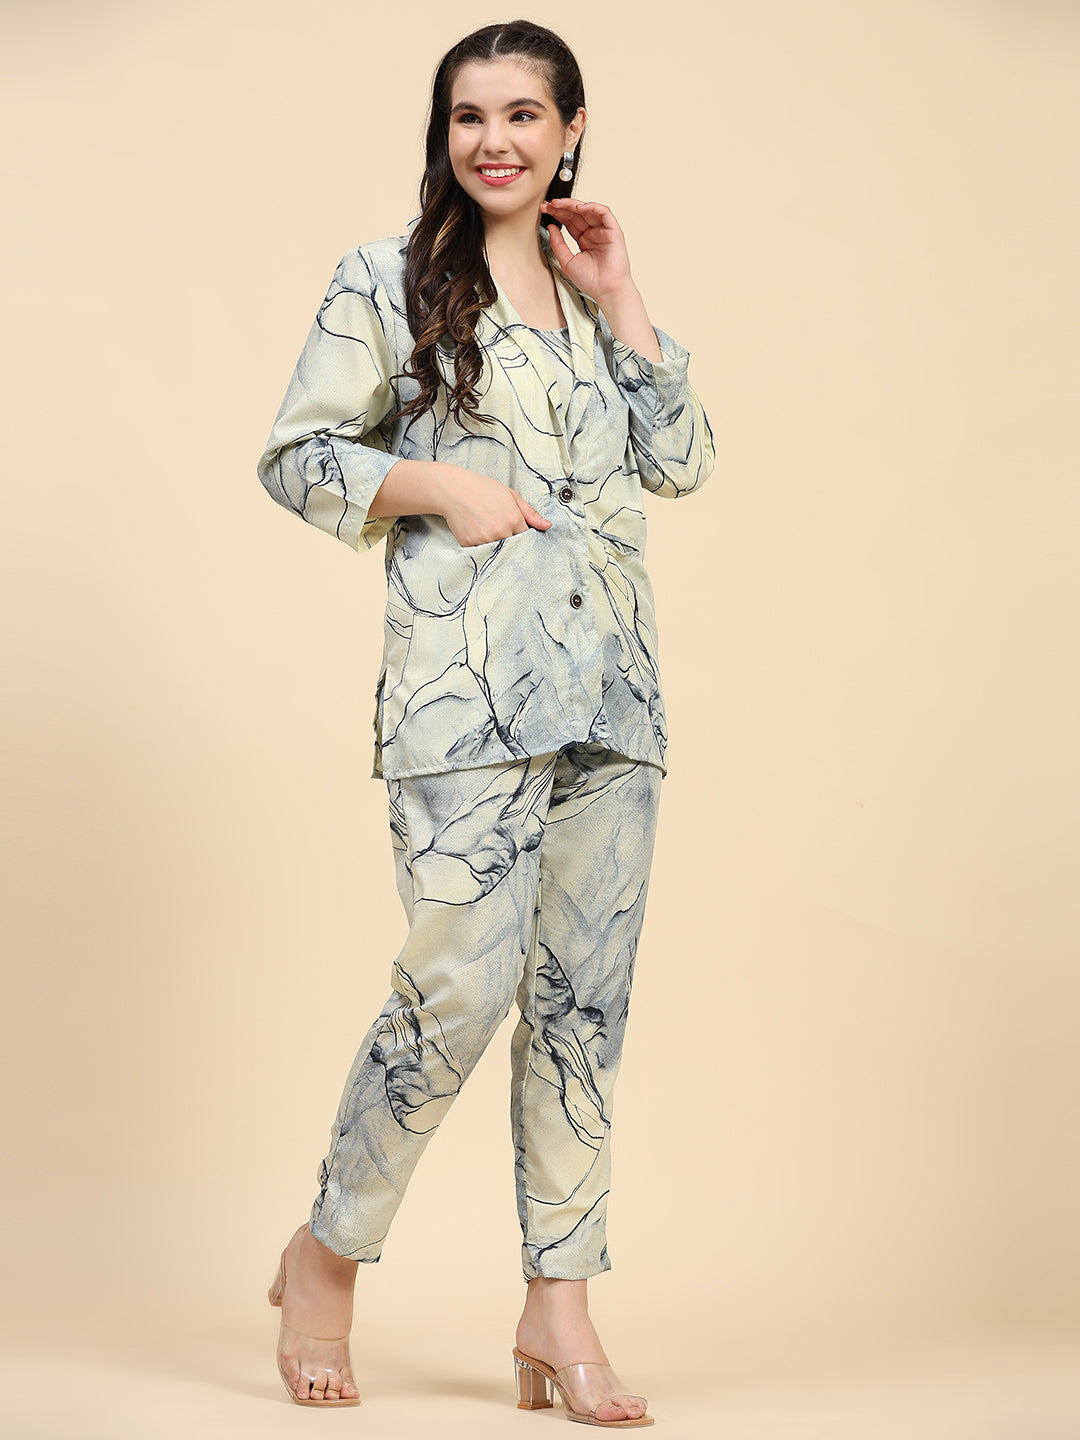 ANUSHIL Stylish Co-ord Set for Women - Printed Crop Top with Pants and Blazer, 3peice Co-ord Set for Casual Wear (Blue)